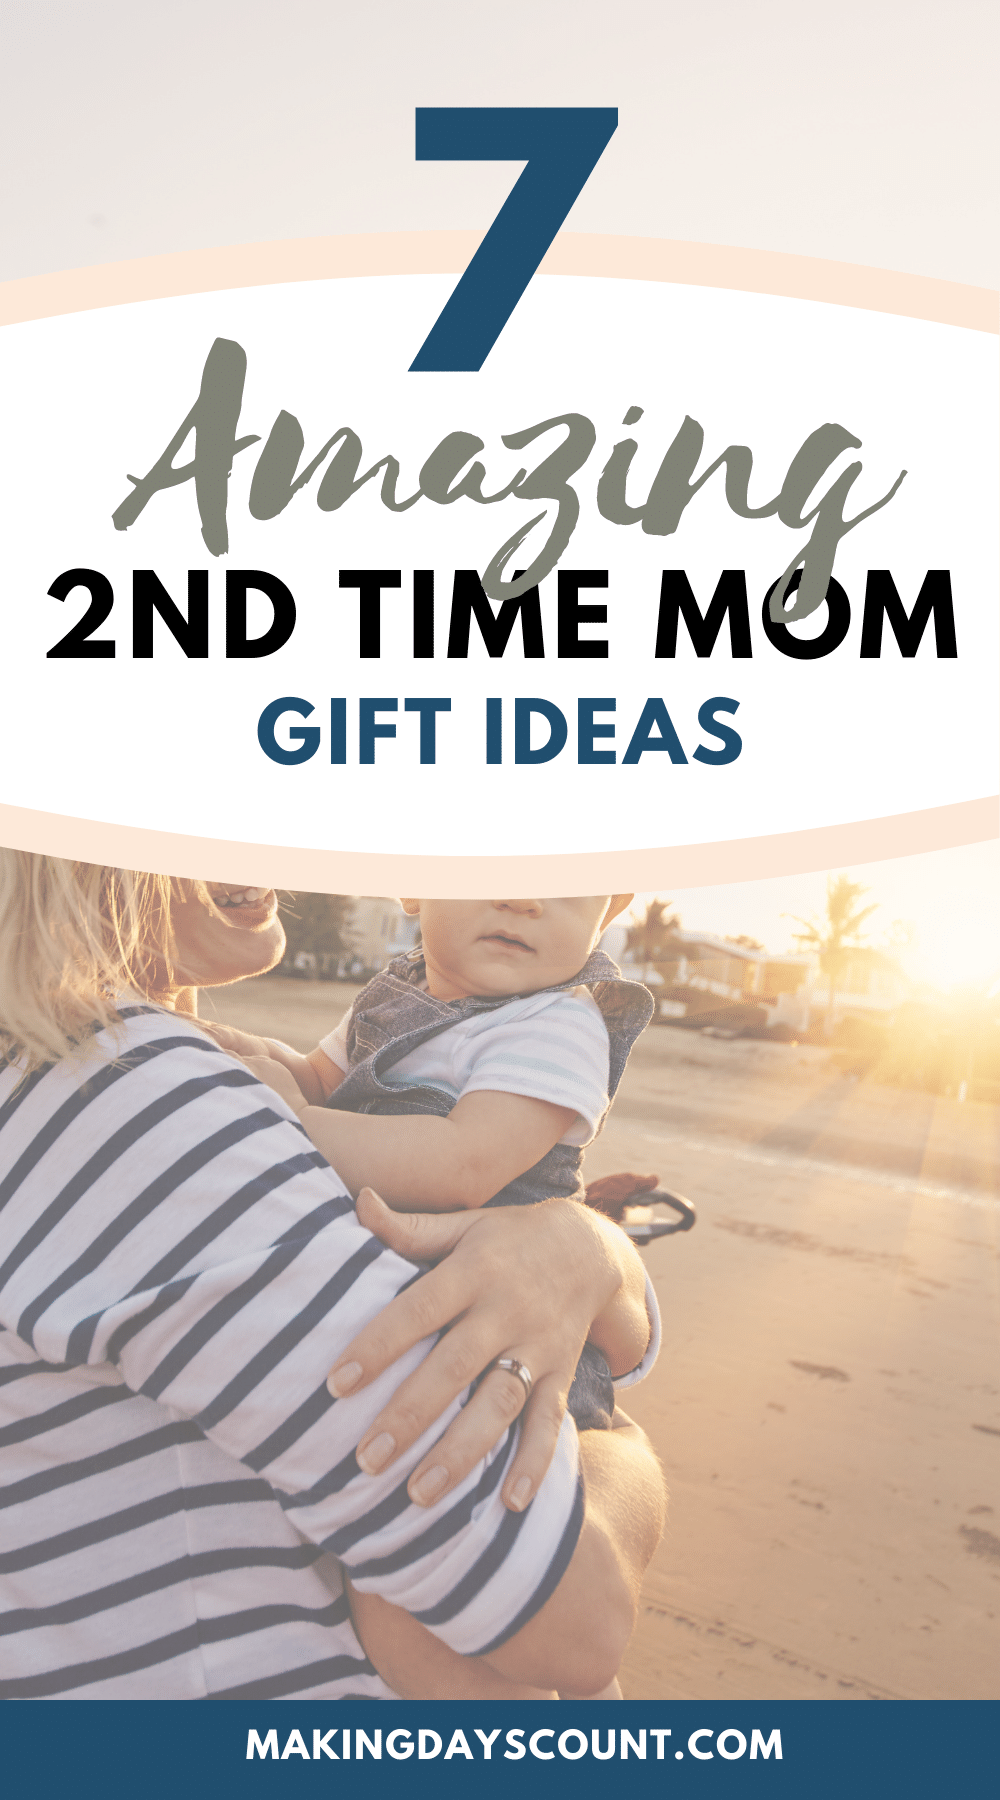 7 Amazing 2nd Time Mom Gift Ideas - Making Days Count